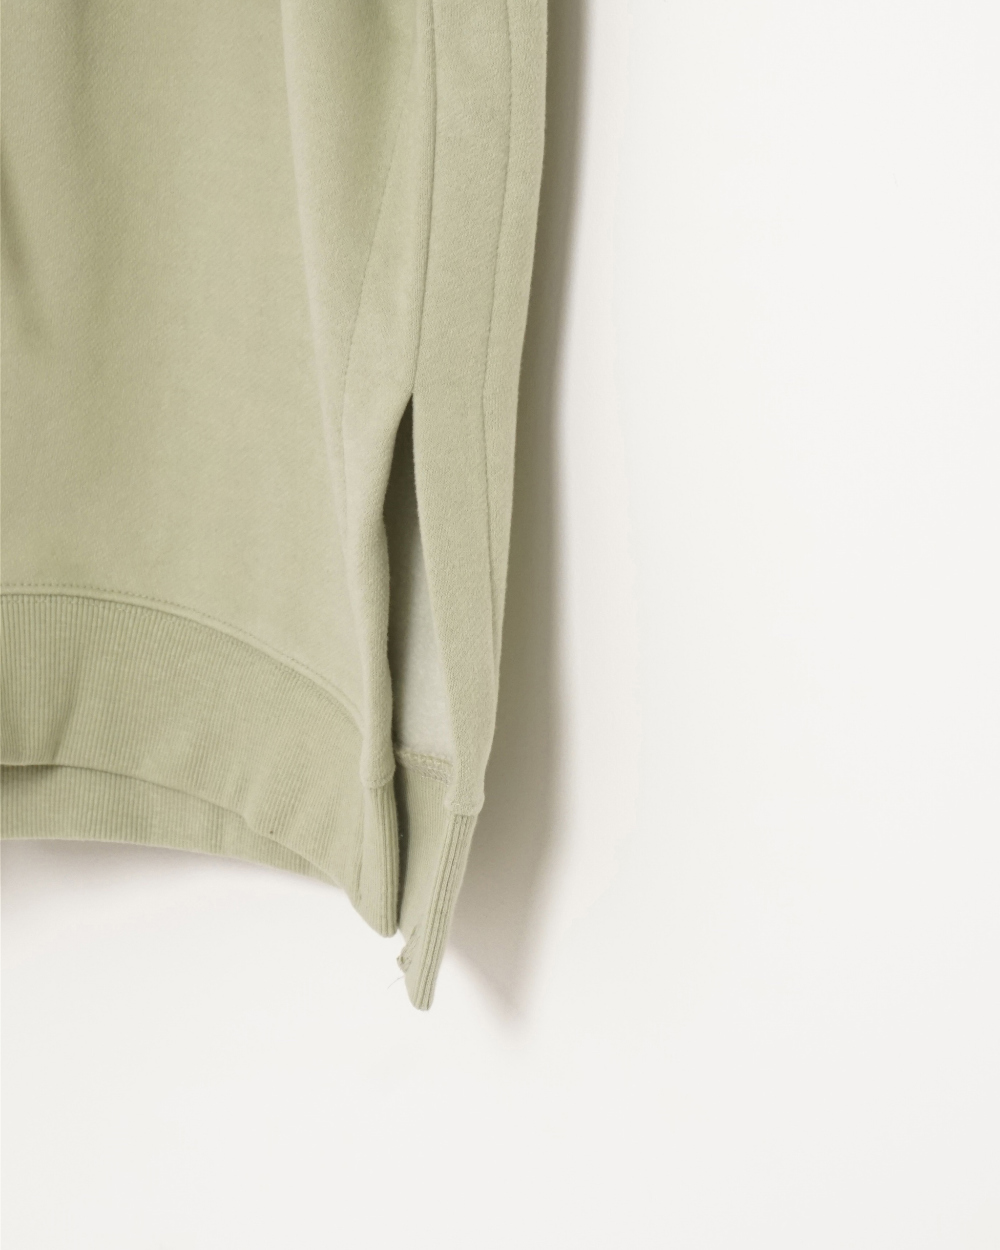 long sleeved tee detail image-S1L49